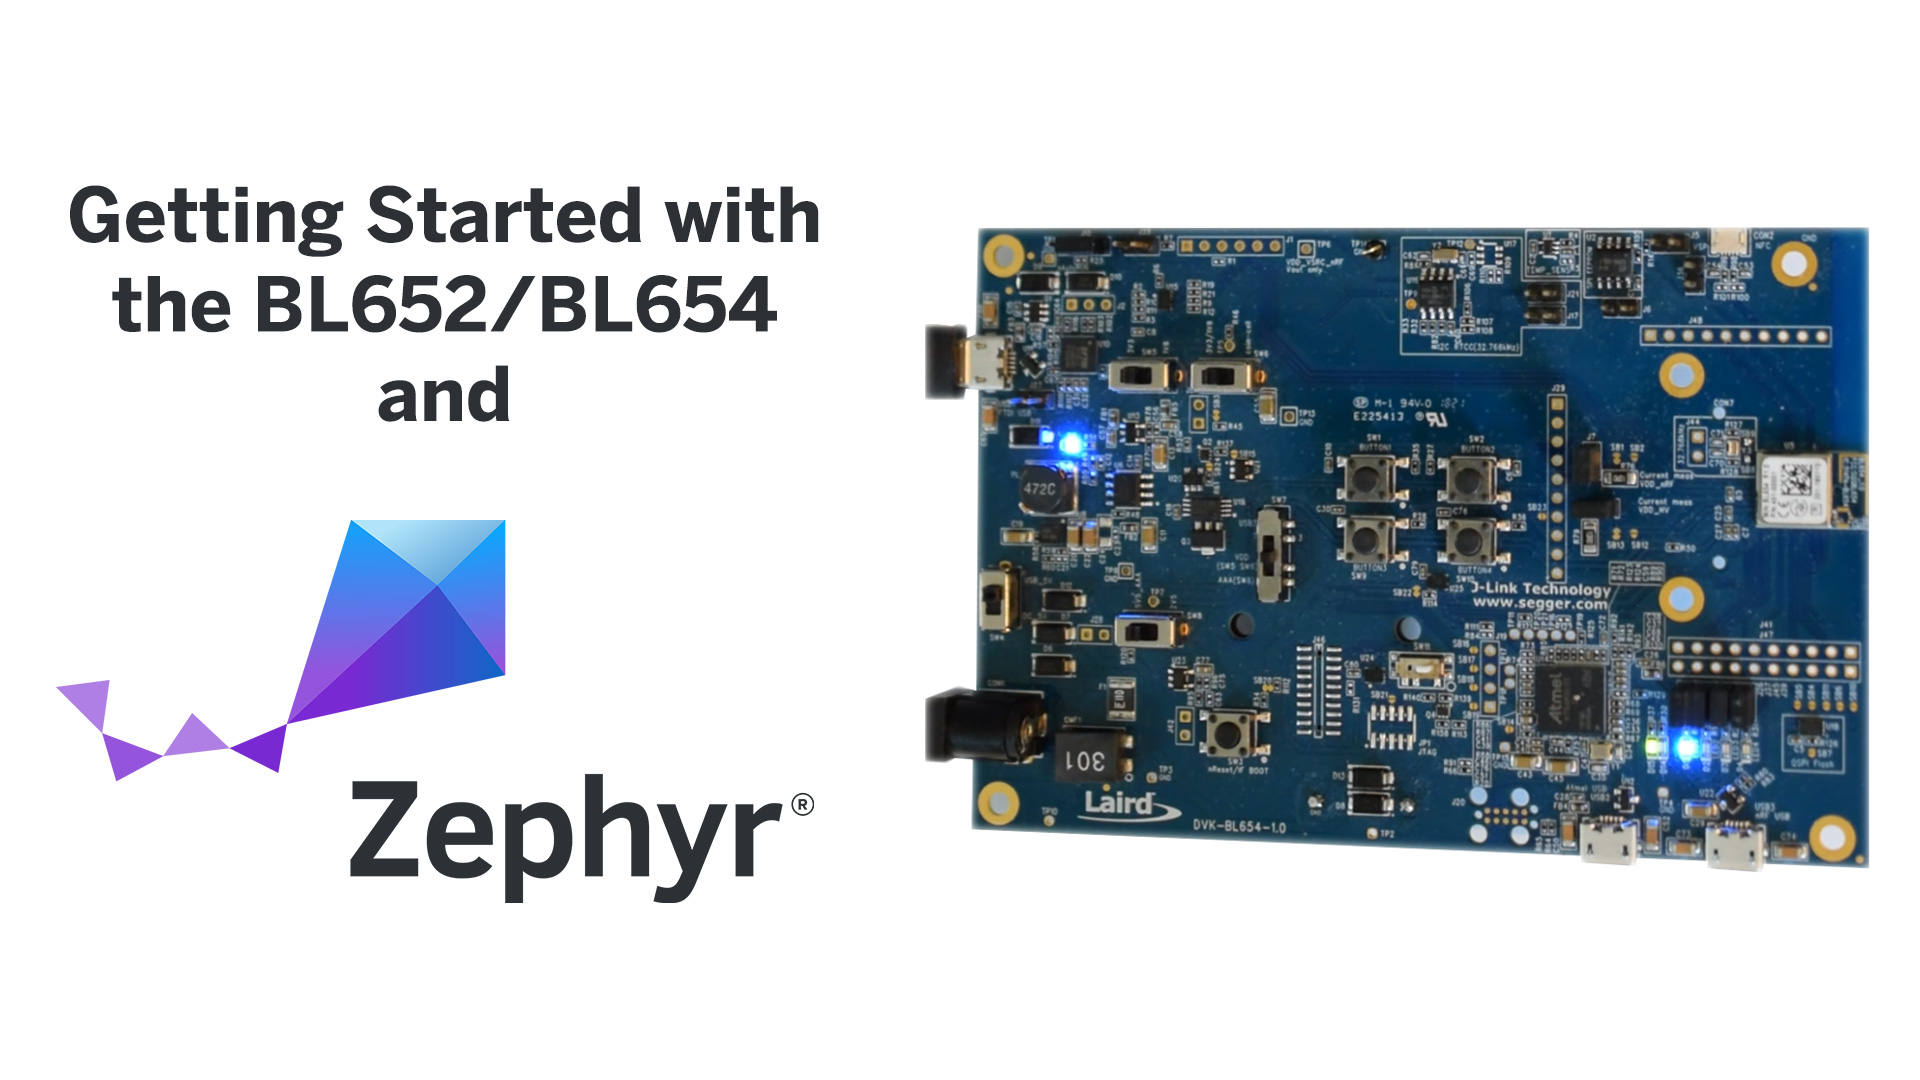 Getting Started with Zephyr on the BL652/BL654